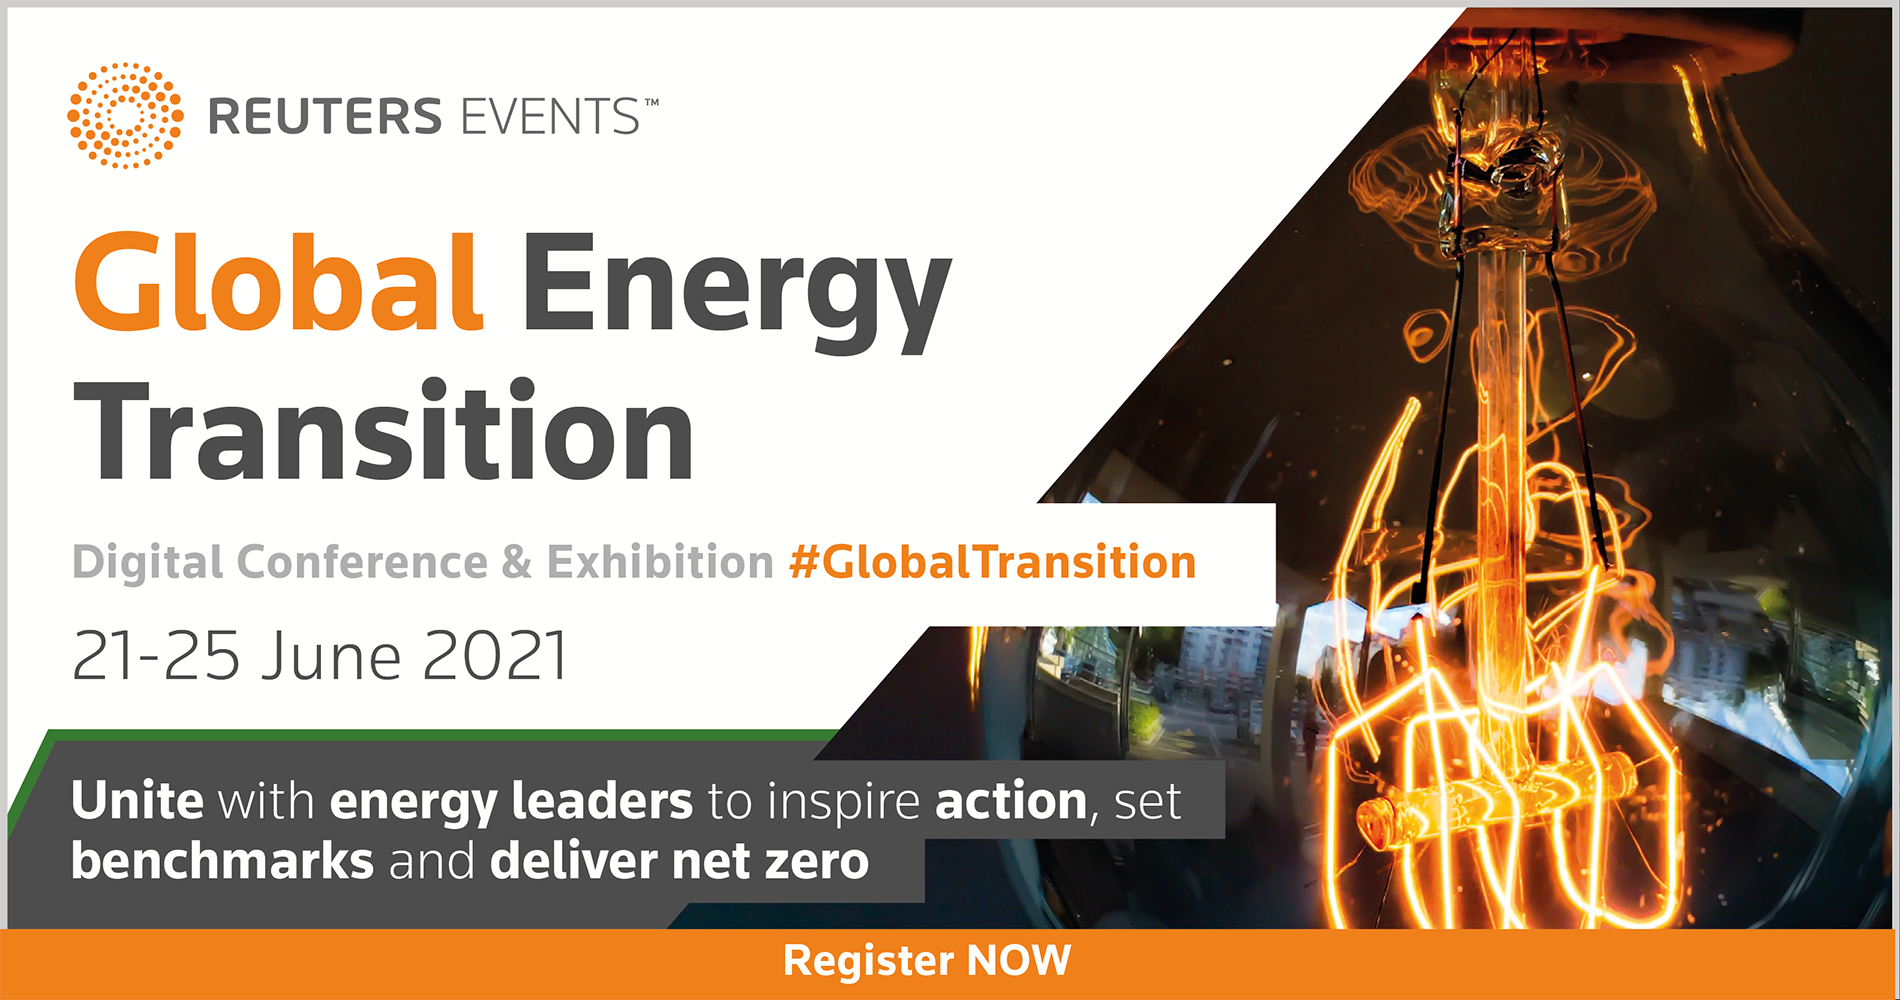 Reuters Events Global Energy Transition The Carbon Trust